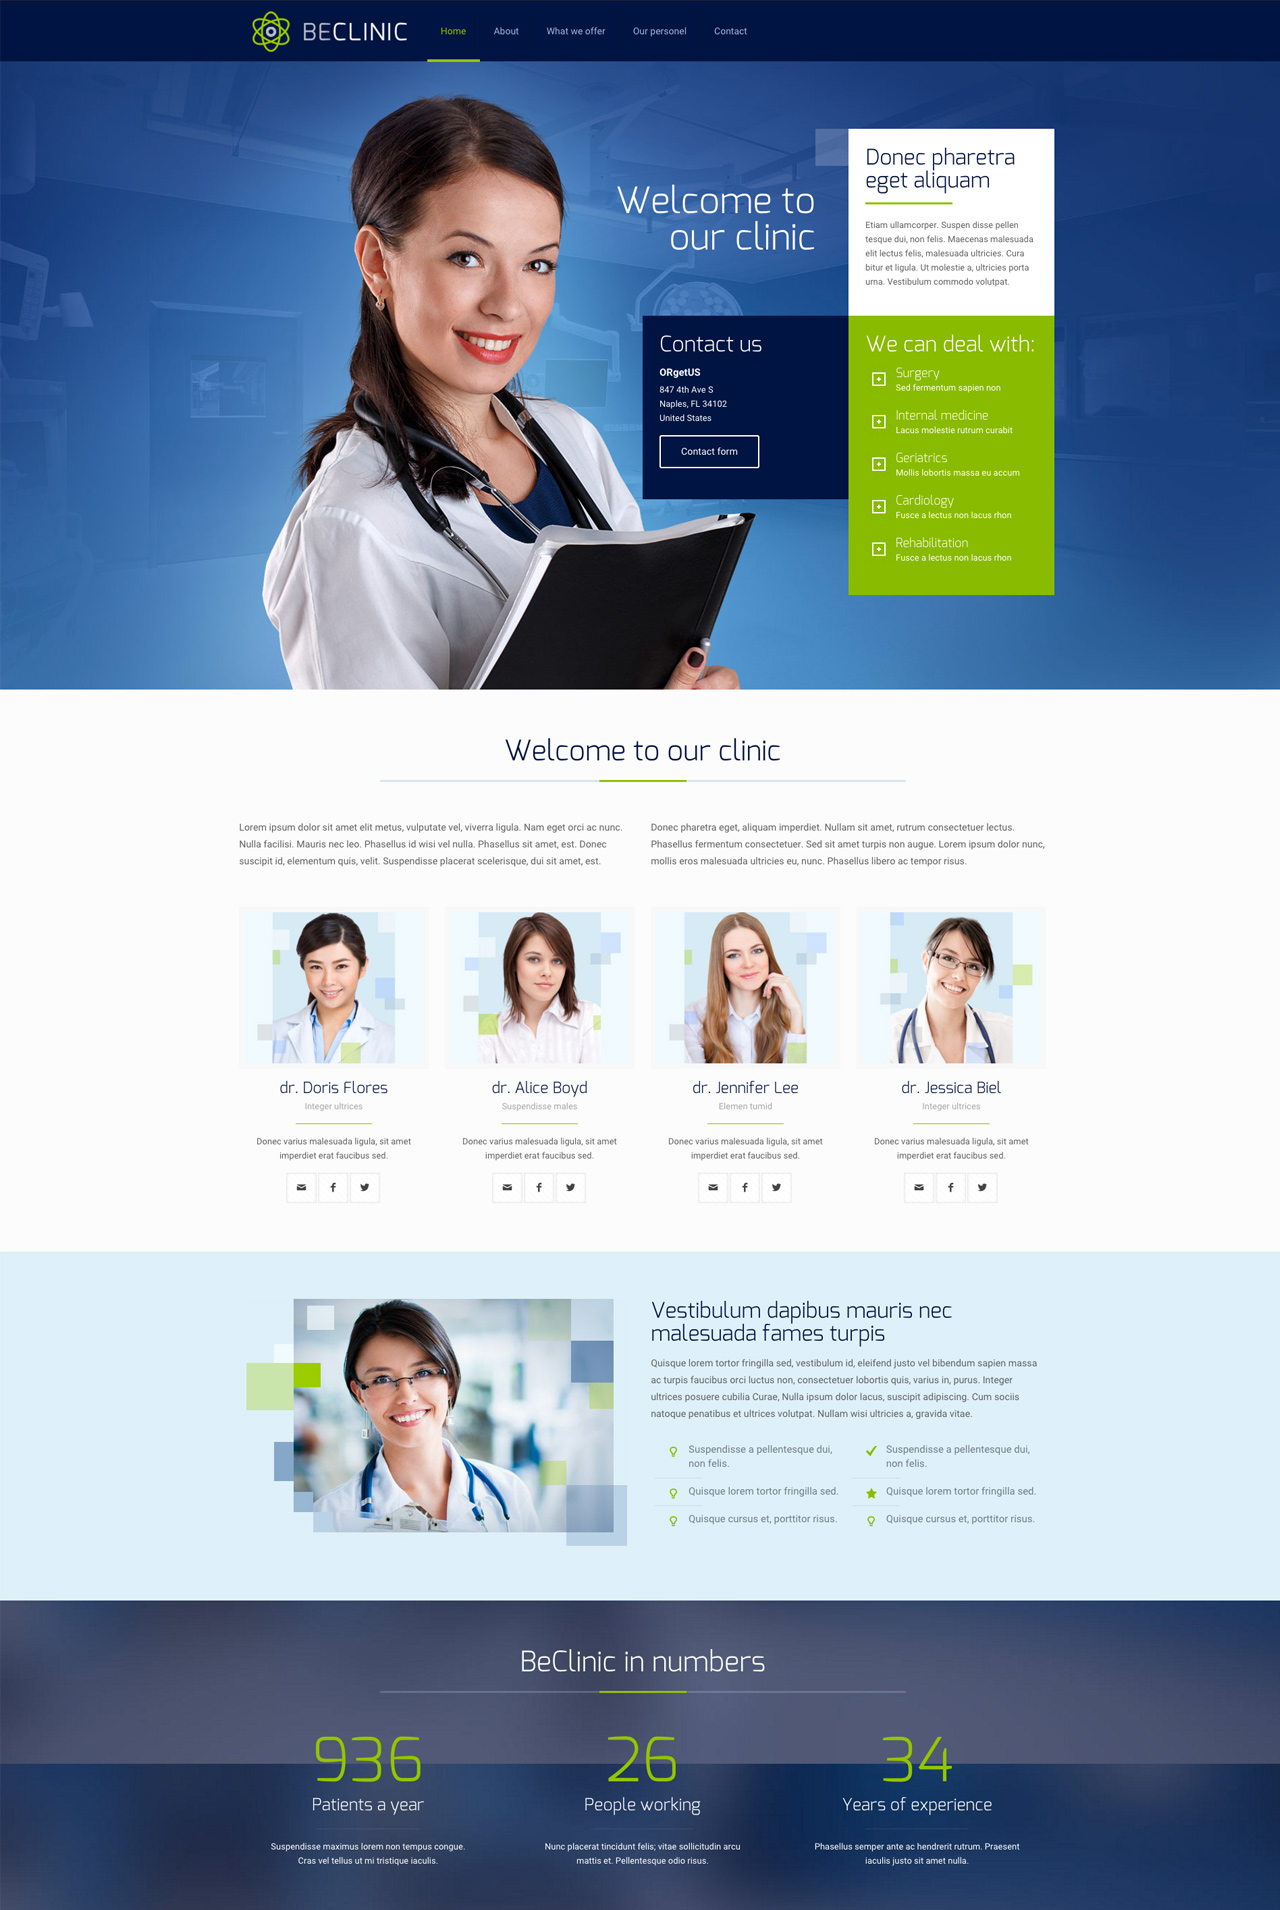 Clinic_Page_Image